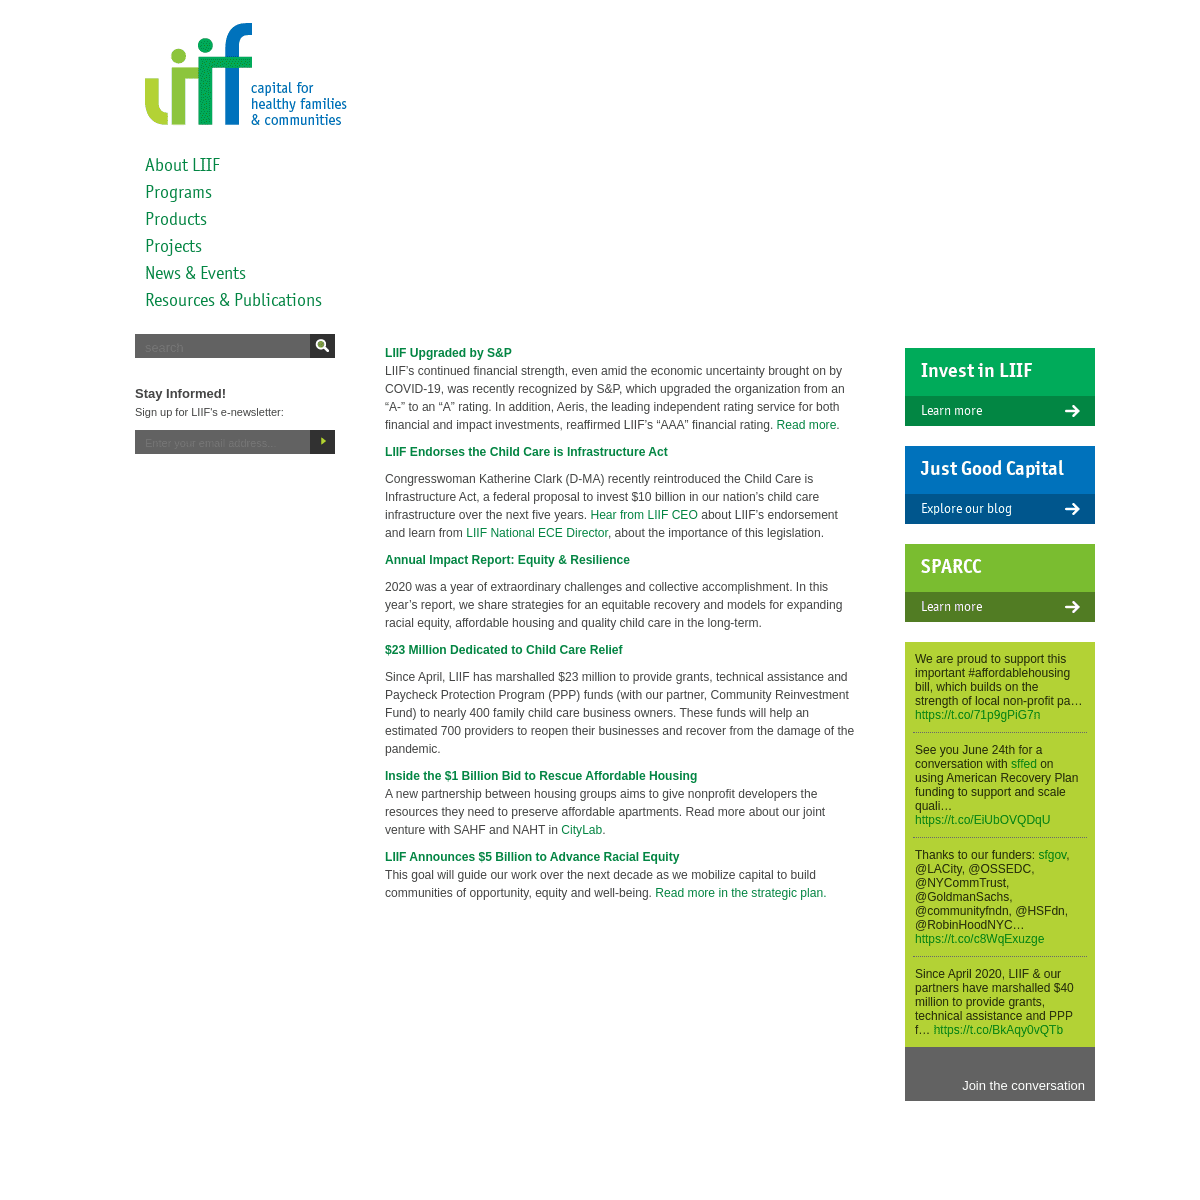 A complete backup of https://liifund.org